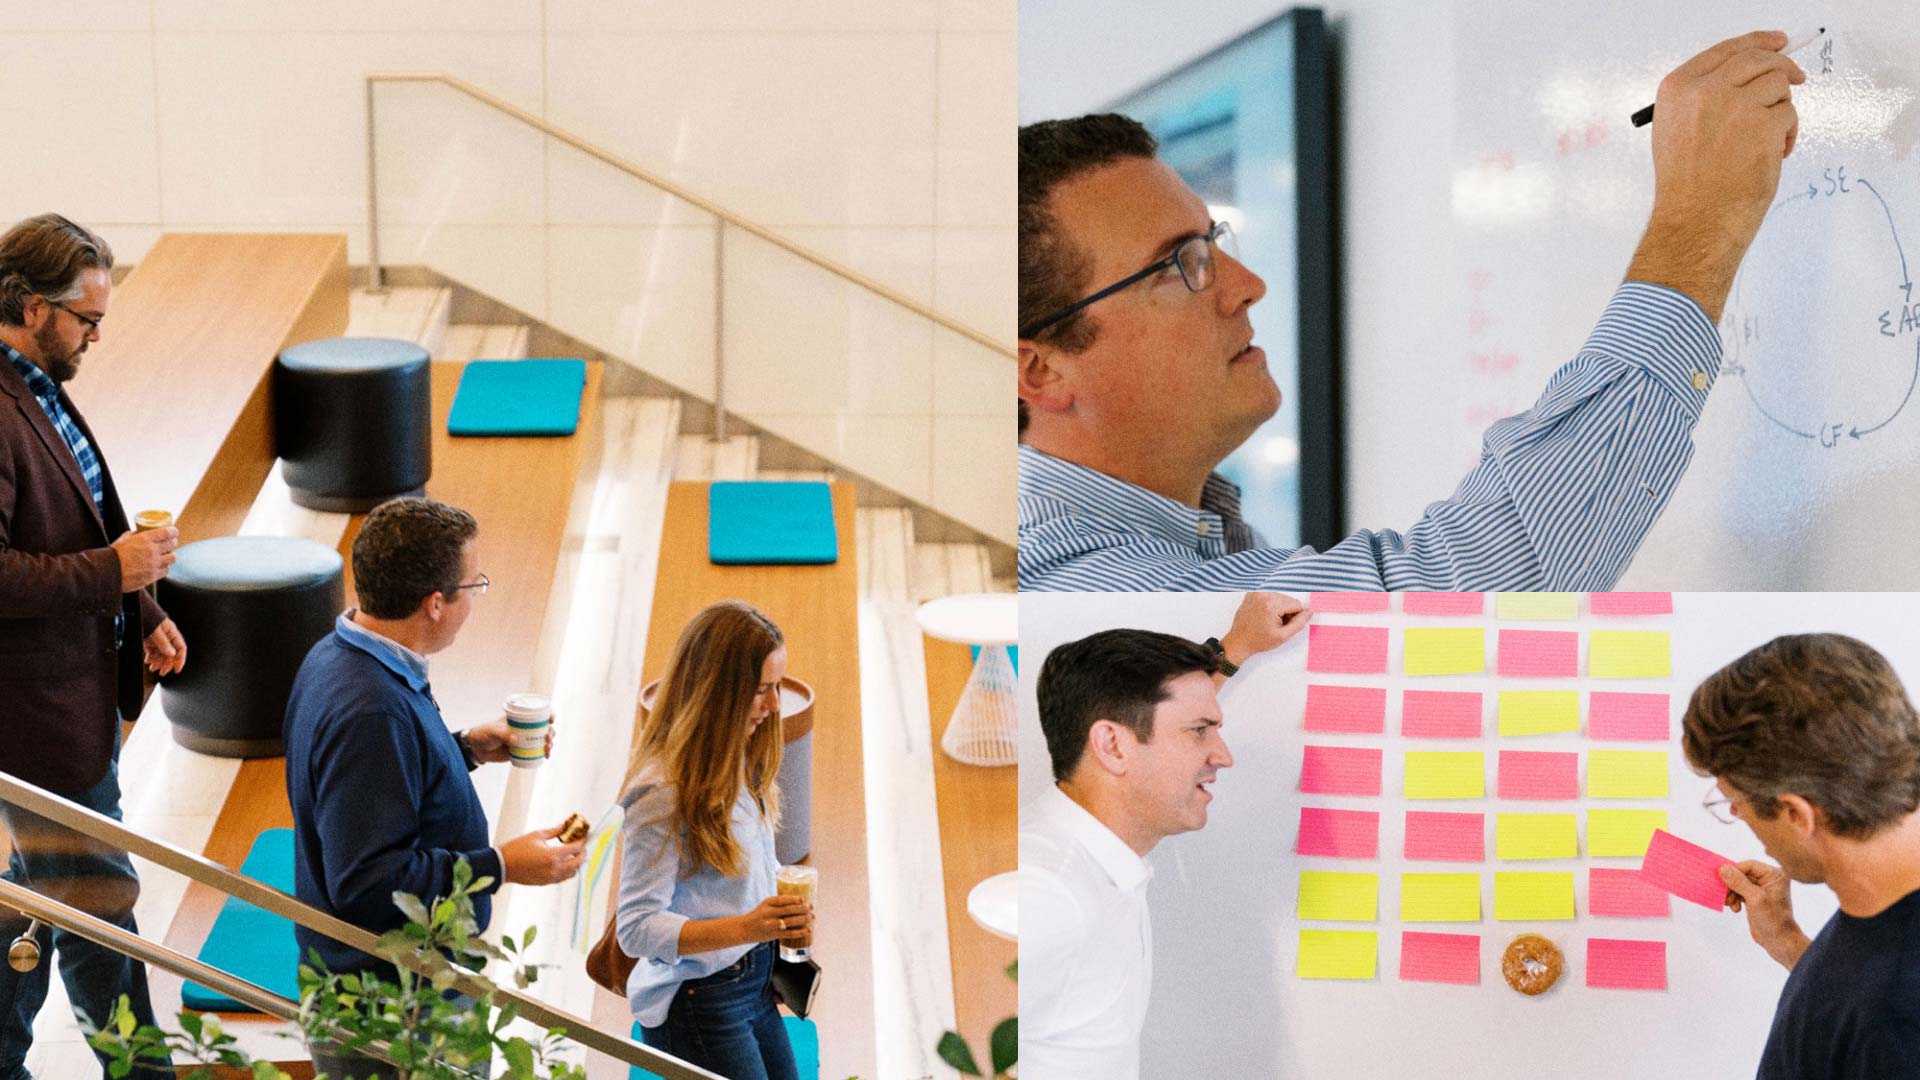 Collage of images showing business people writing on white board, collaborating with sticky notes, and walking through a room holding coffees